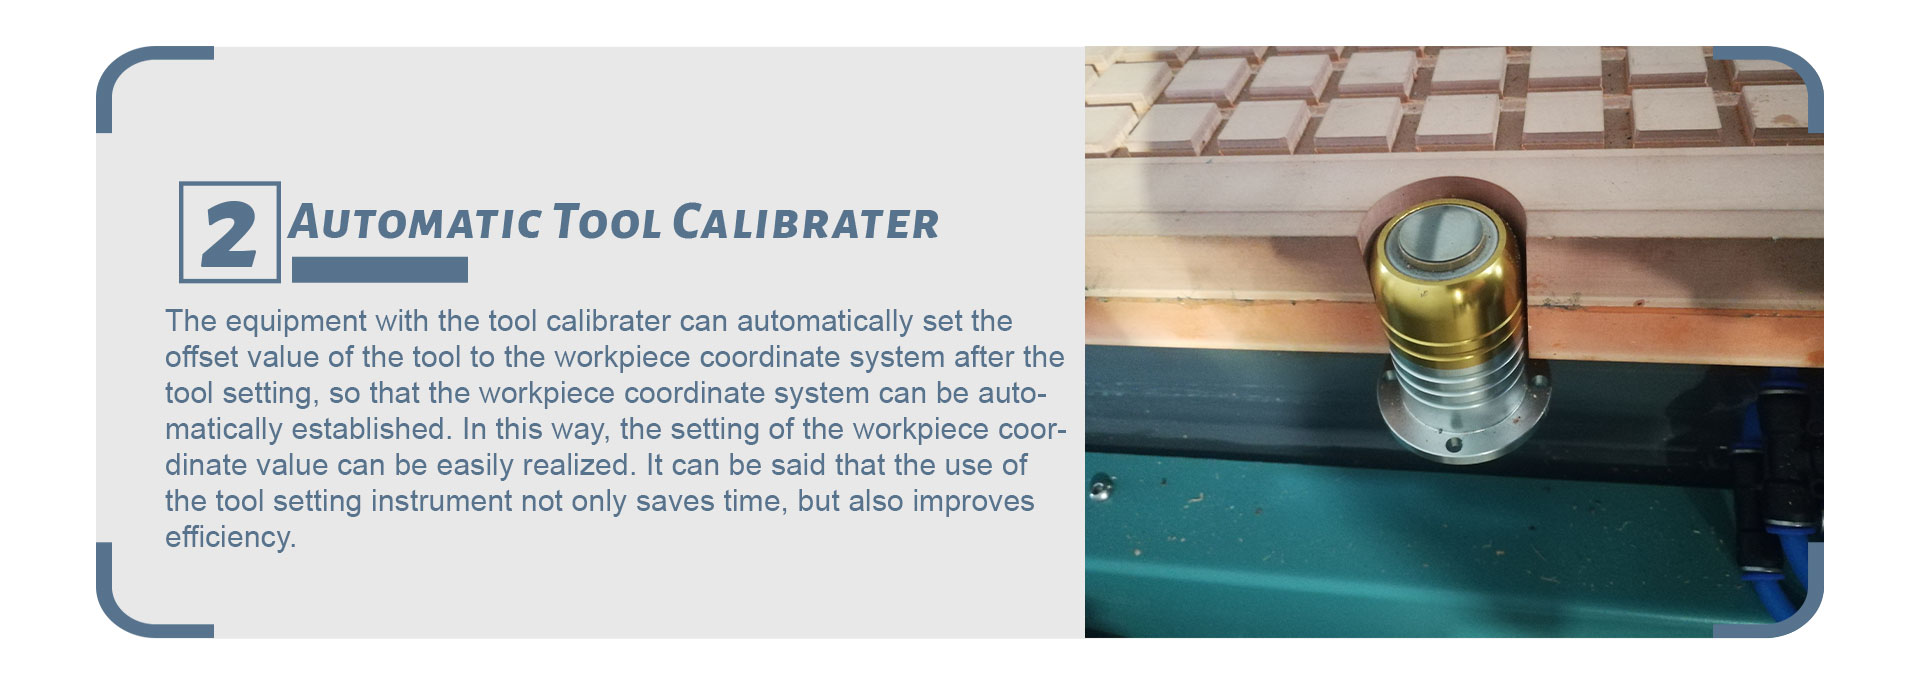 Automatic Tool Calibrater